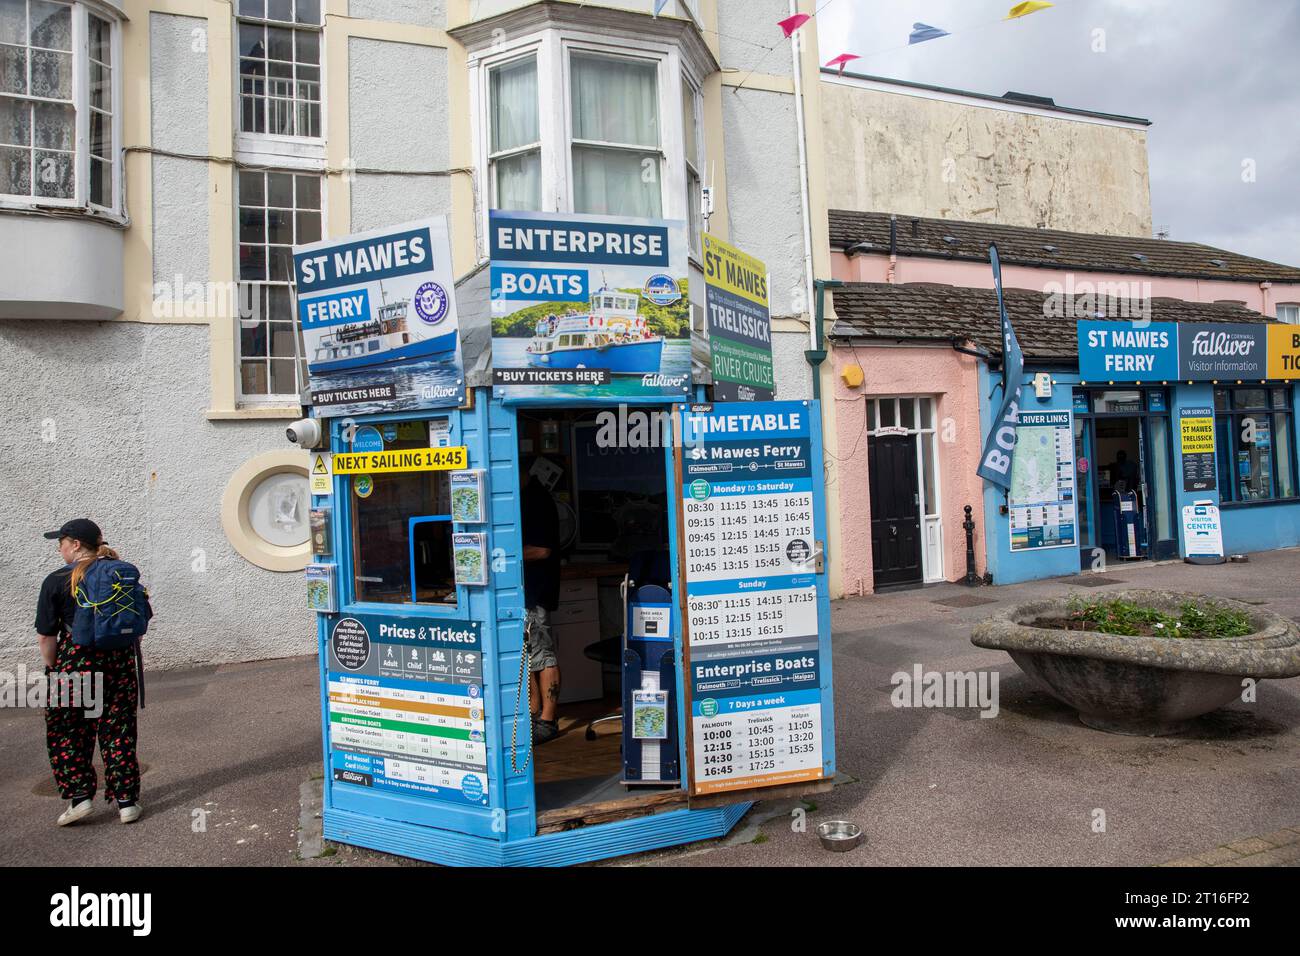 September 2023, Falmouth Pier Cornwall, ticket booths offering ferry trips and river cruises from Falmouth Pier to St Mawes and local areas,England Stock Photo